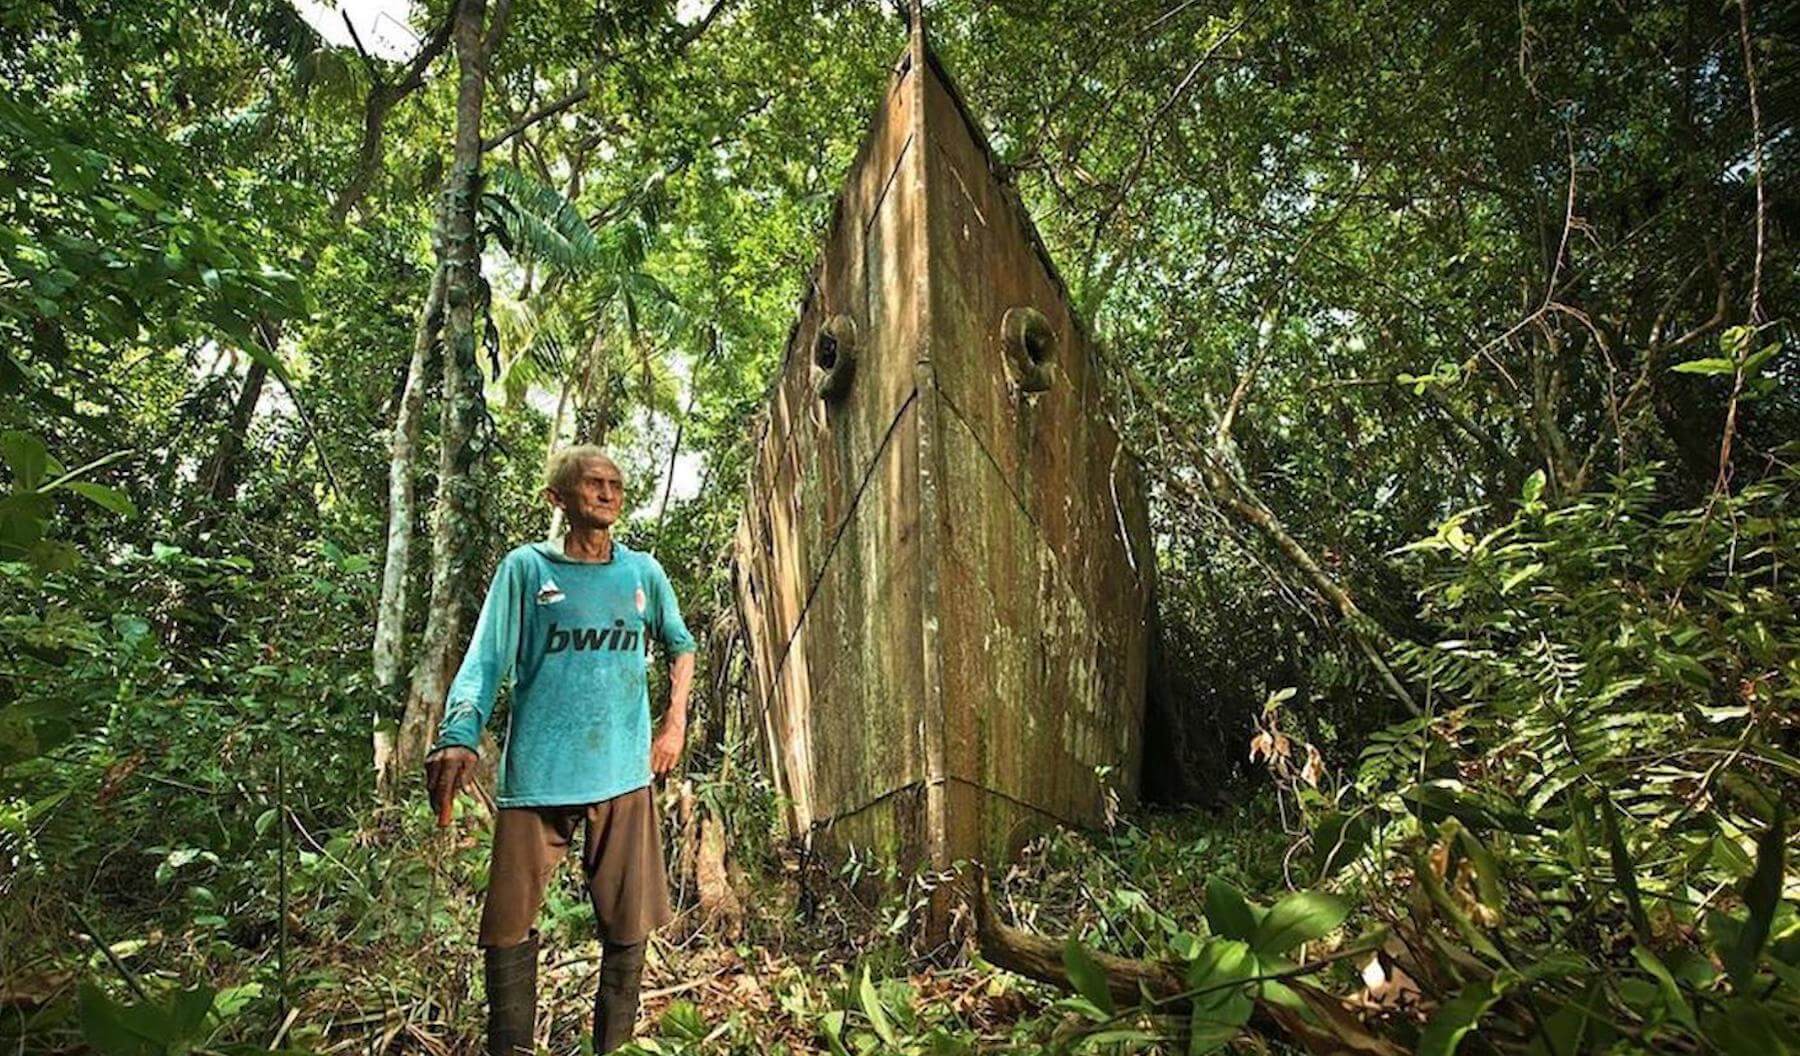 Still from Once Upon a Time in Venezuela. A man stands outside in a forest with an old, rusty boat behind him.